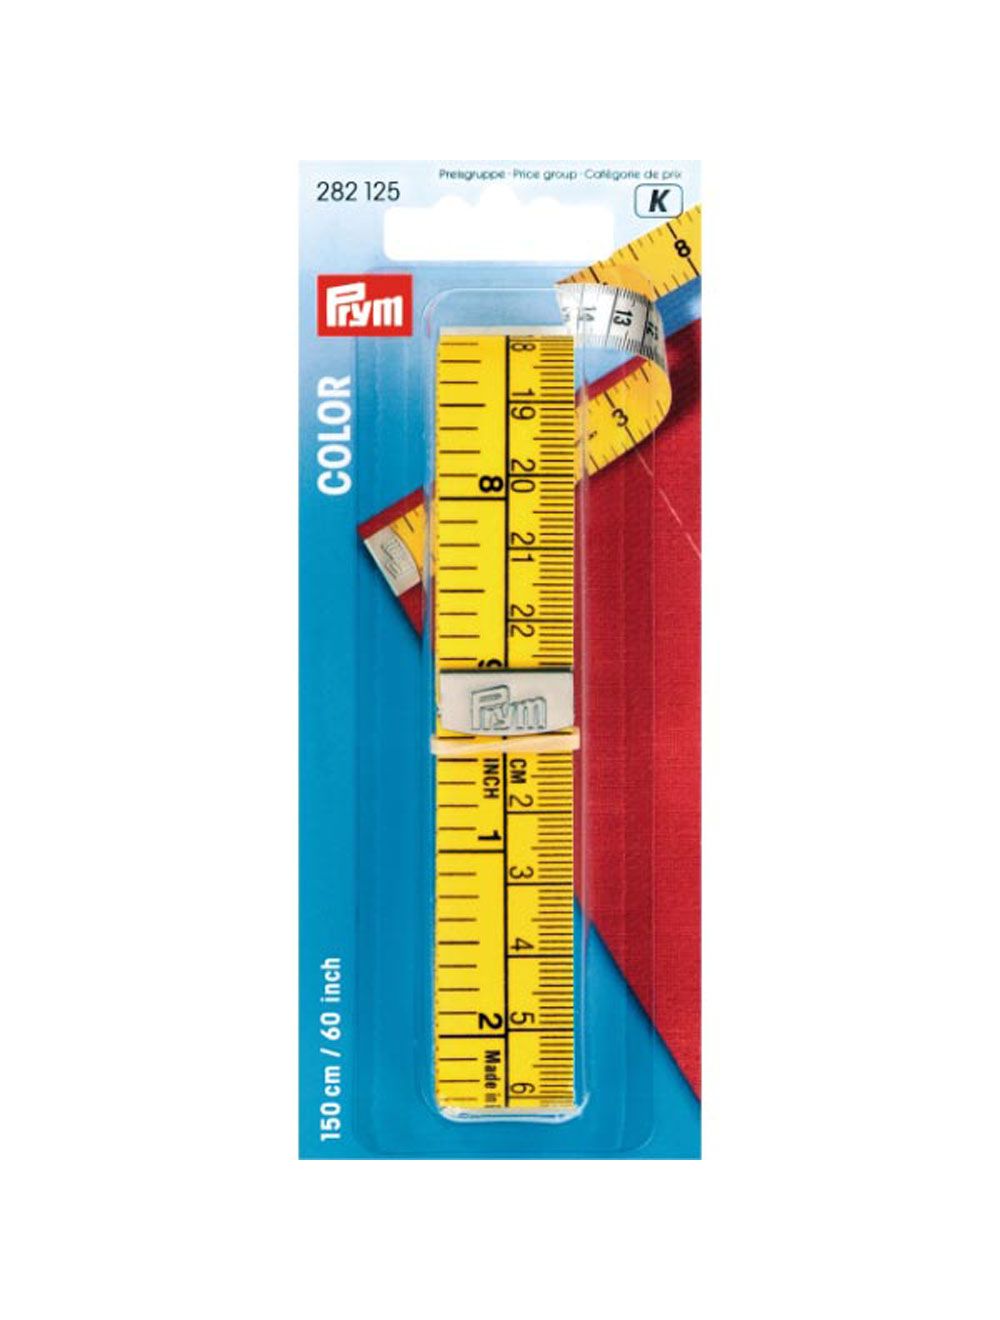 Tape Measure 60 150cm, Measuring Tapes, Sewing Notions, Dressmaking, Sewing  Supplies, Sewing Essentials, Quilting, Plastic Measuring Tape 